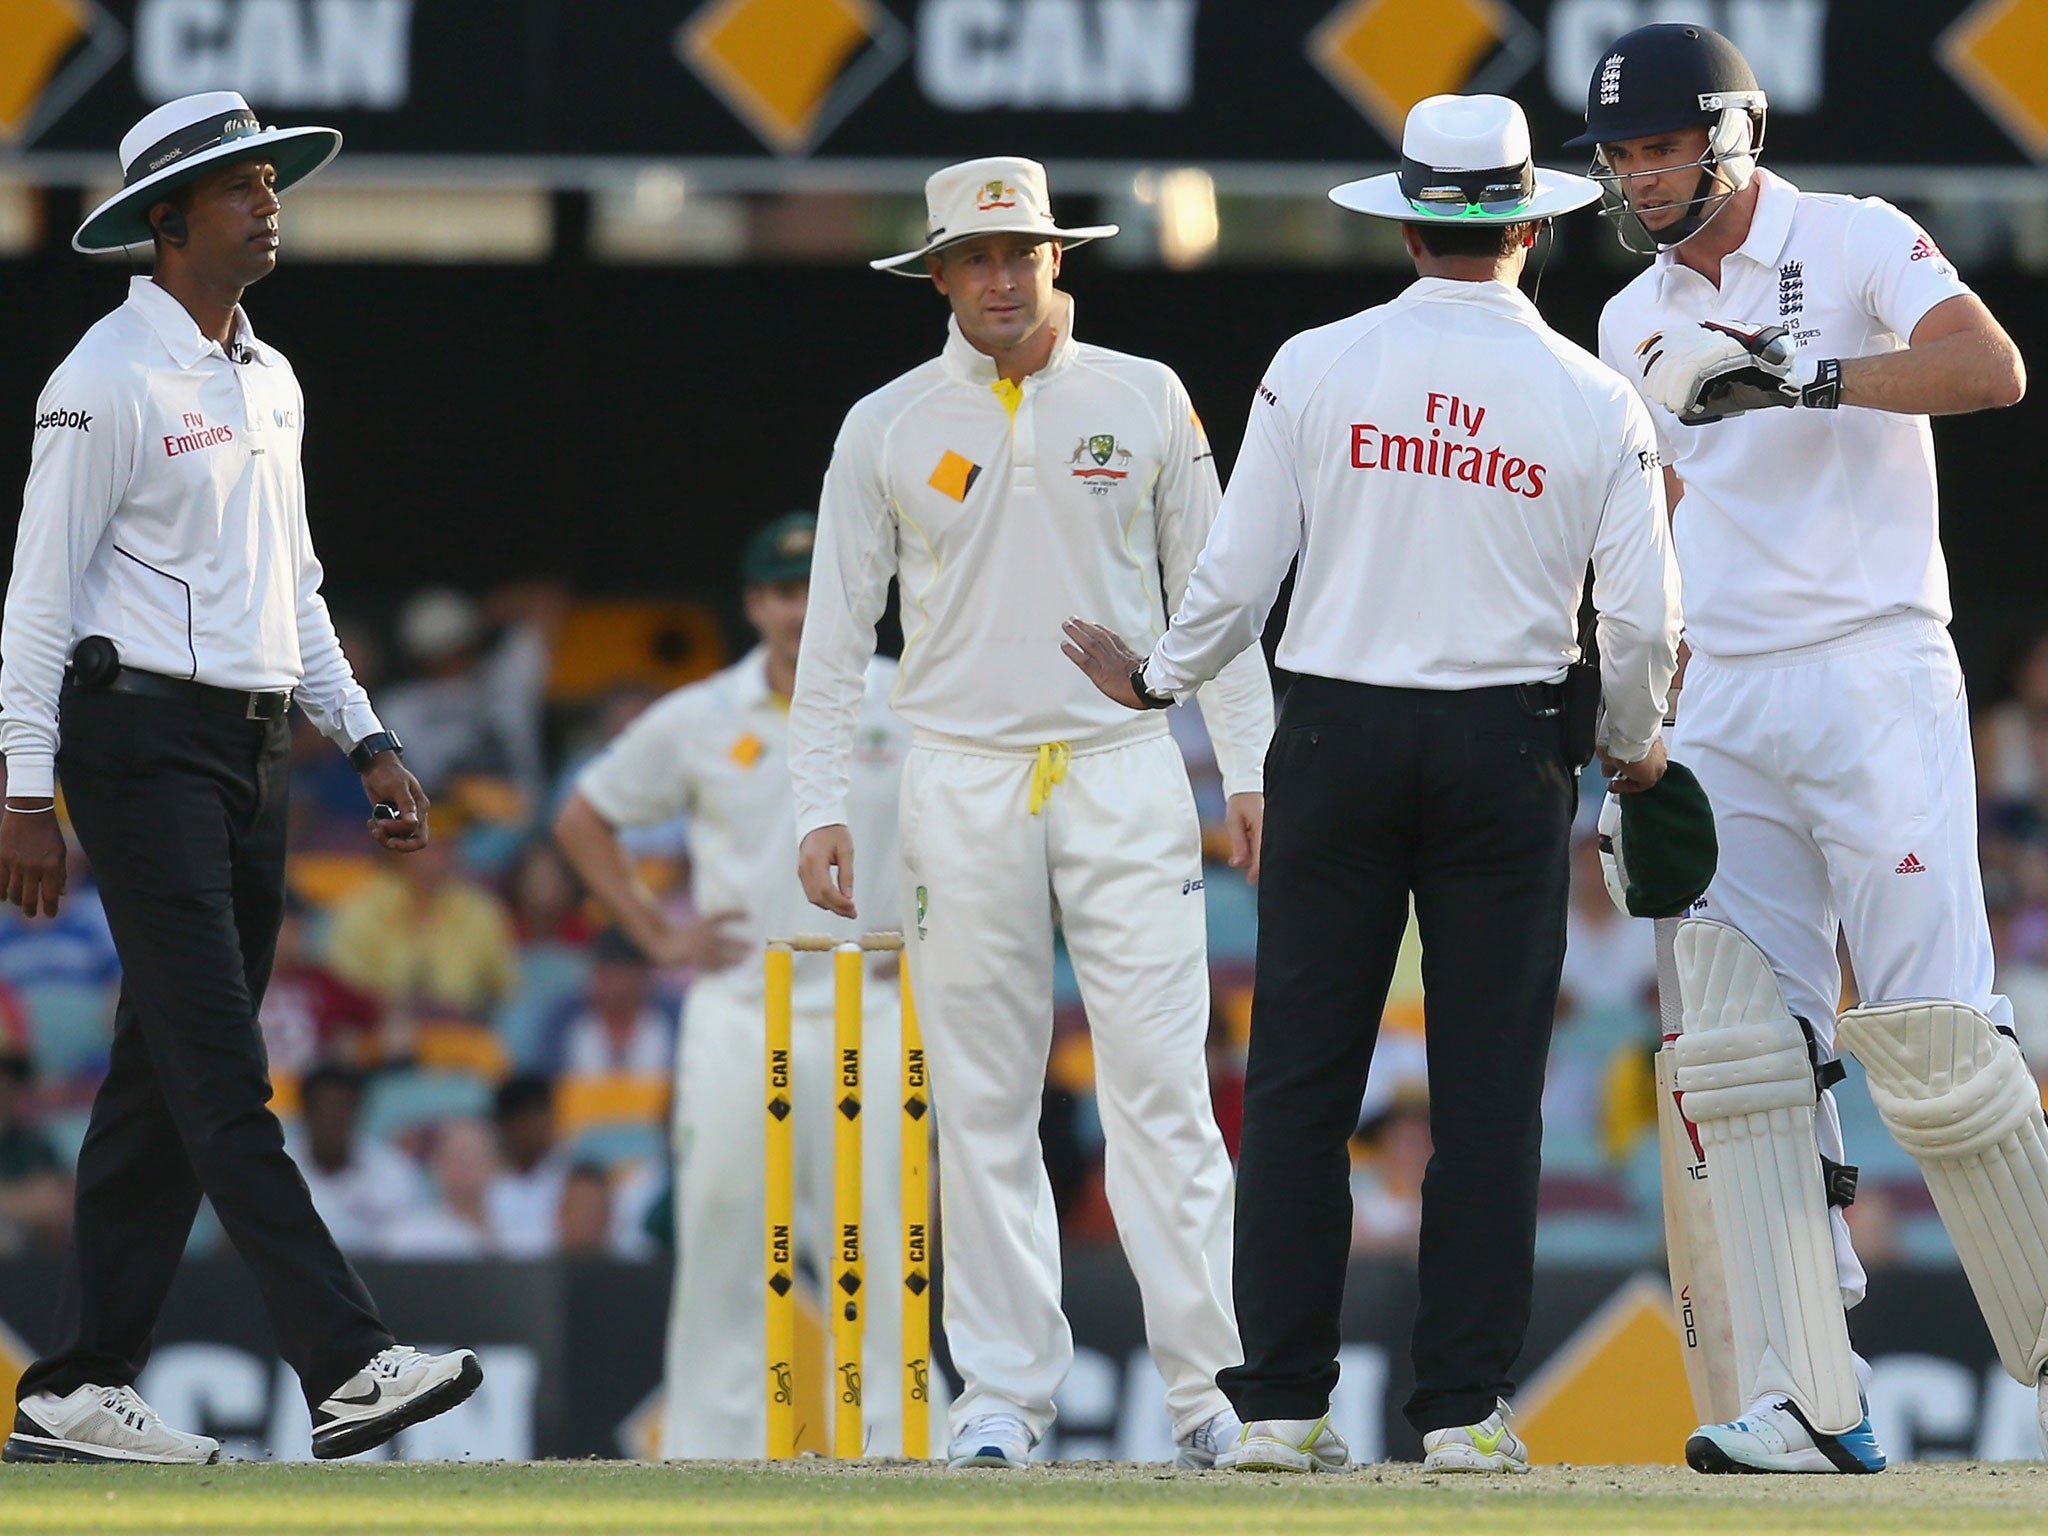 The umpires and James Anderson have words following the Englishman's spat with Michael Clarke